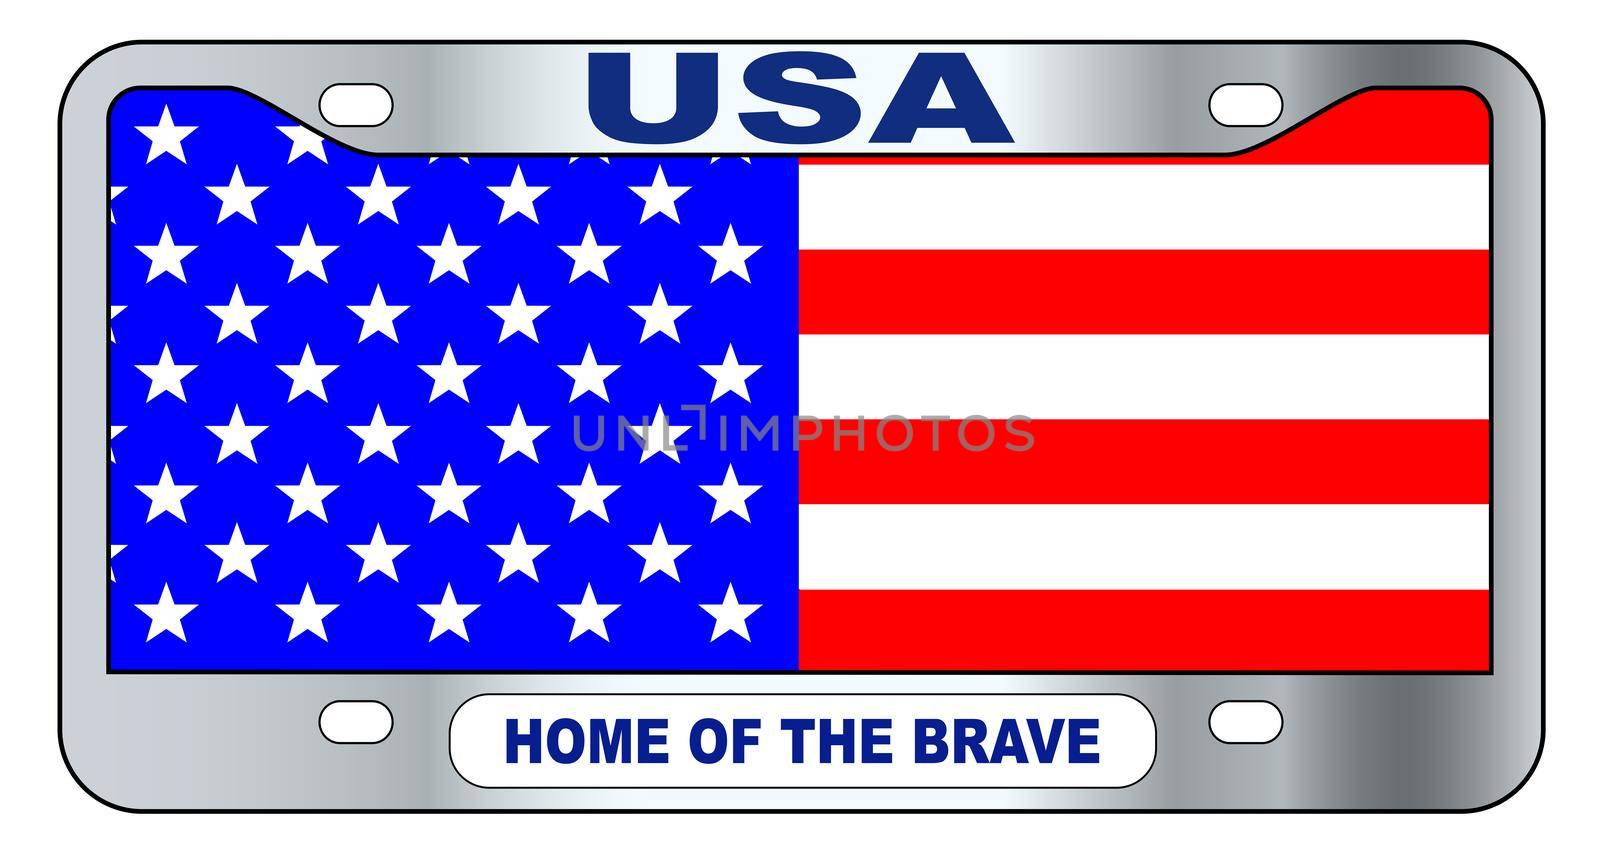 USA spoof state license plate in the colors of the Stars and Stripes flag over a white background with the legend HOME OF THE BRAVE